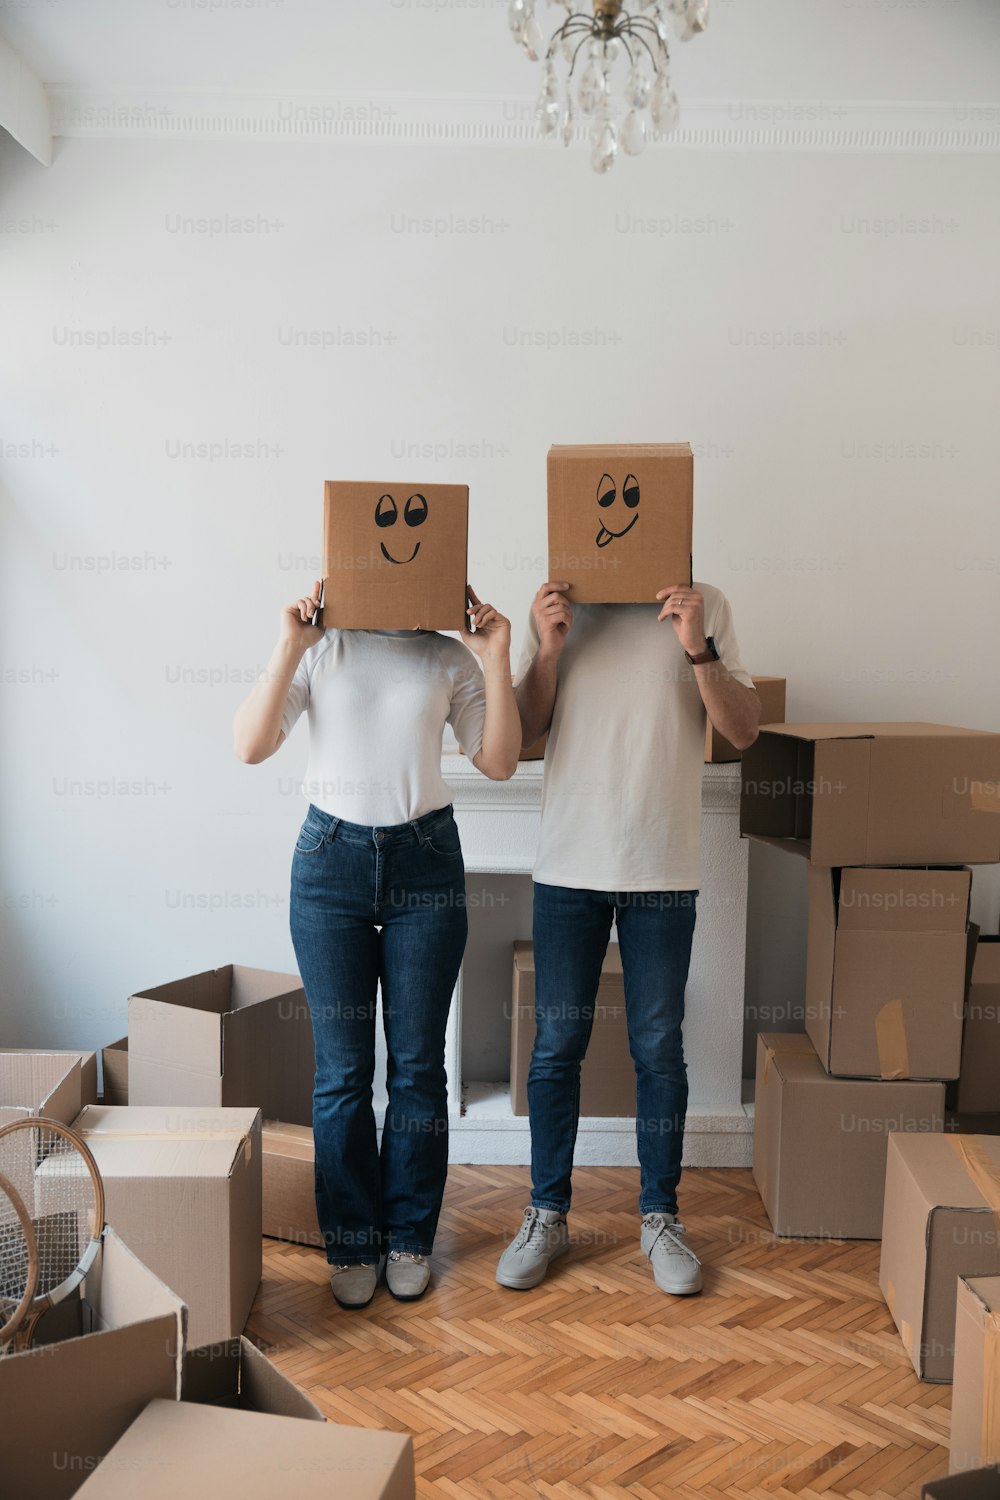 two people holding cardboard boxes with faces drawn on them